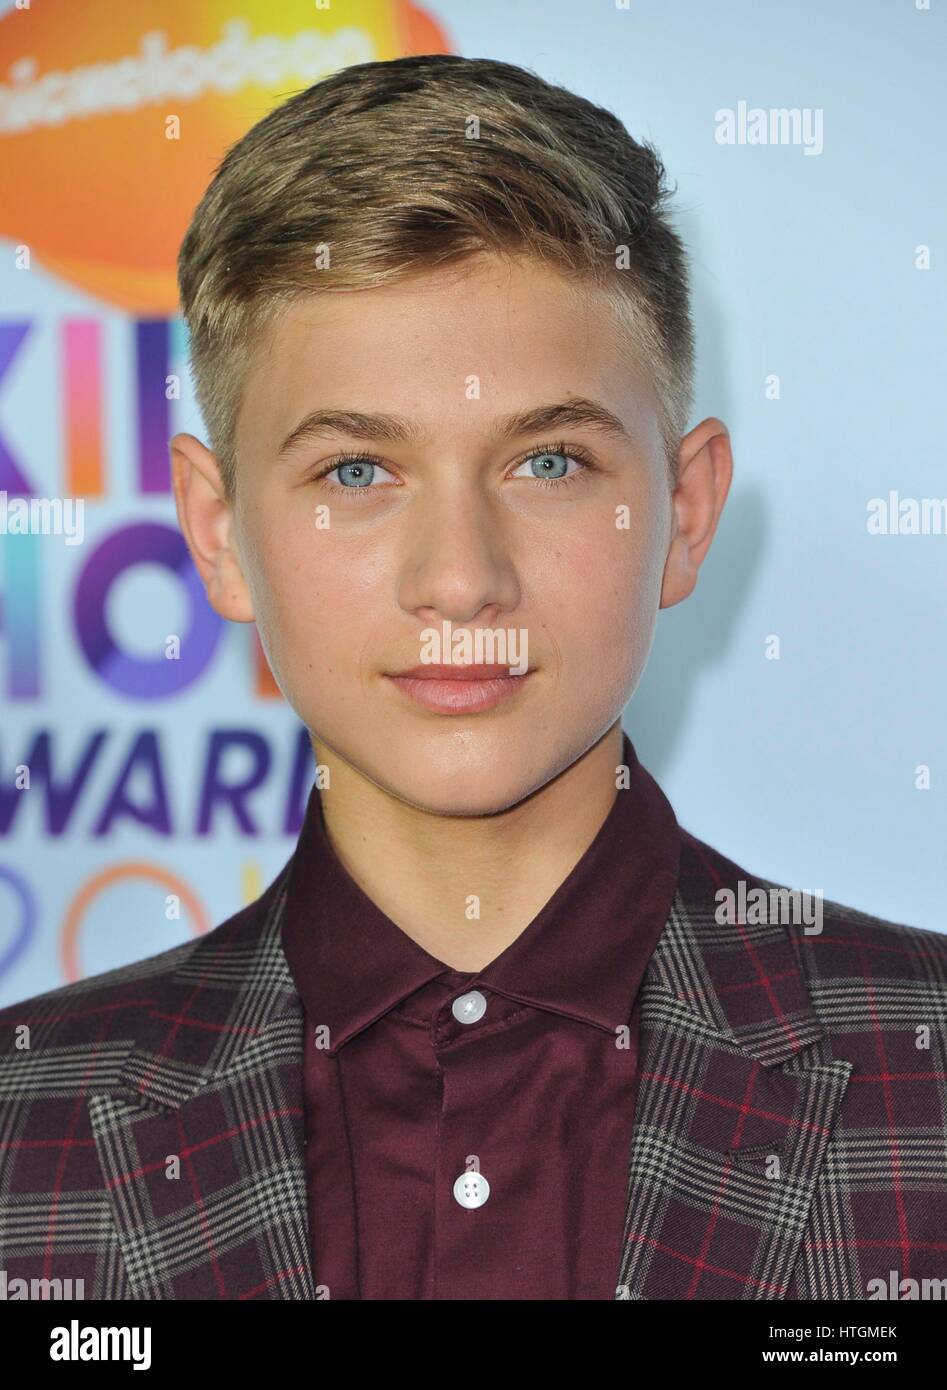 Los Angeles, CA, USA. 11th Mar, 2017. Thomas Kuc at arrivals for Nickelodeon's Kids' Choice Awards 2017 - Arrivals, USC Galen Center, Los Angeles, CA March 11, 2017. Credit: Elizabeth Goodenough/Everett Collection/Alamy Live News Stock Photo